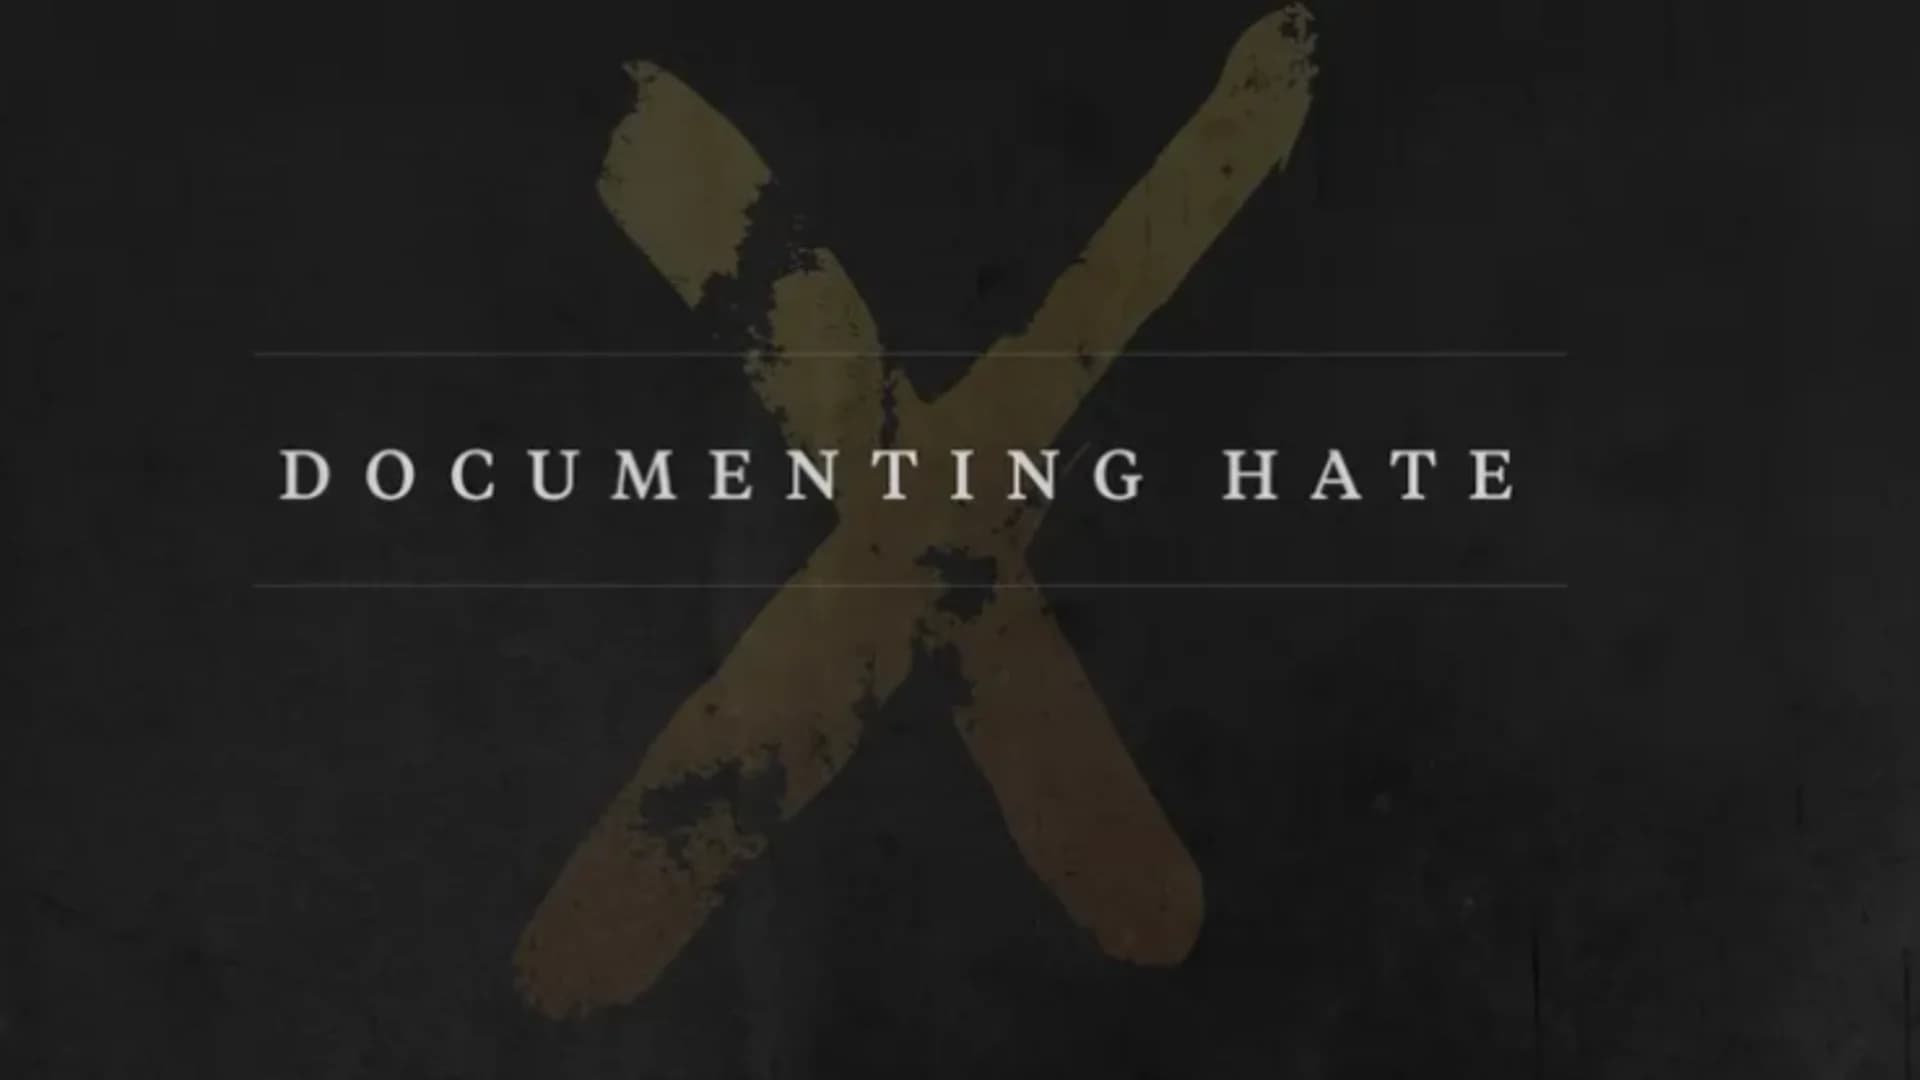 Kane in your Corner partners with Documenting Hate to report on hate crimes